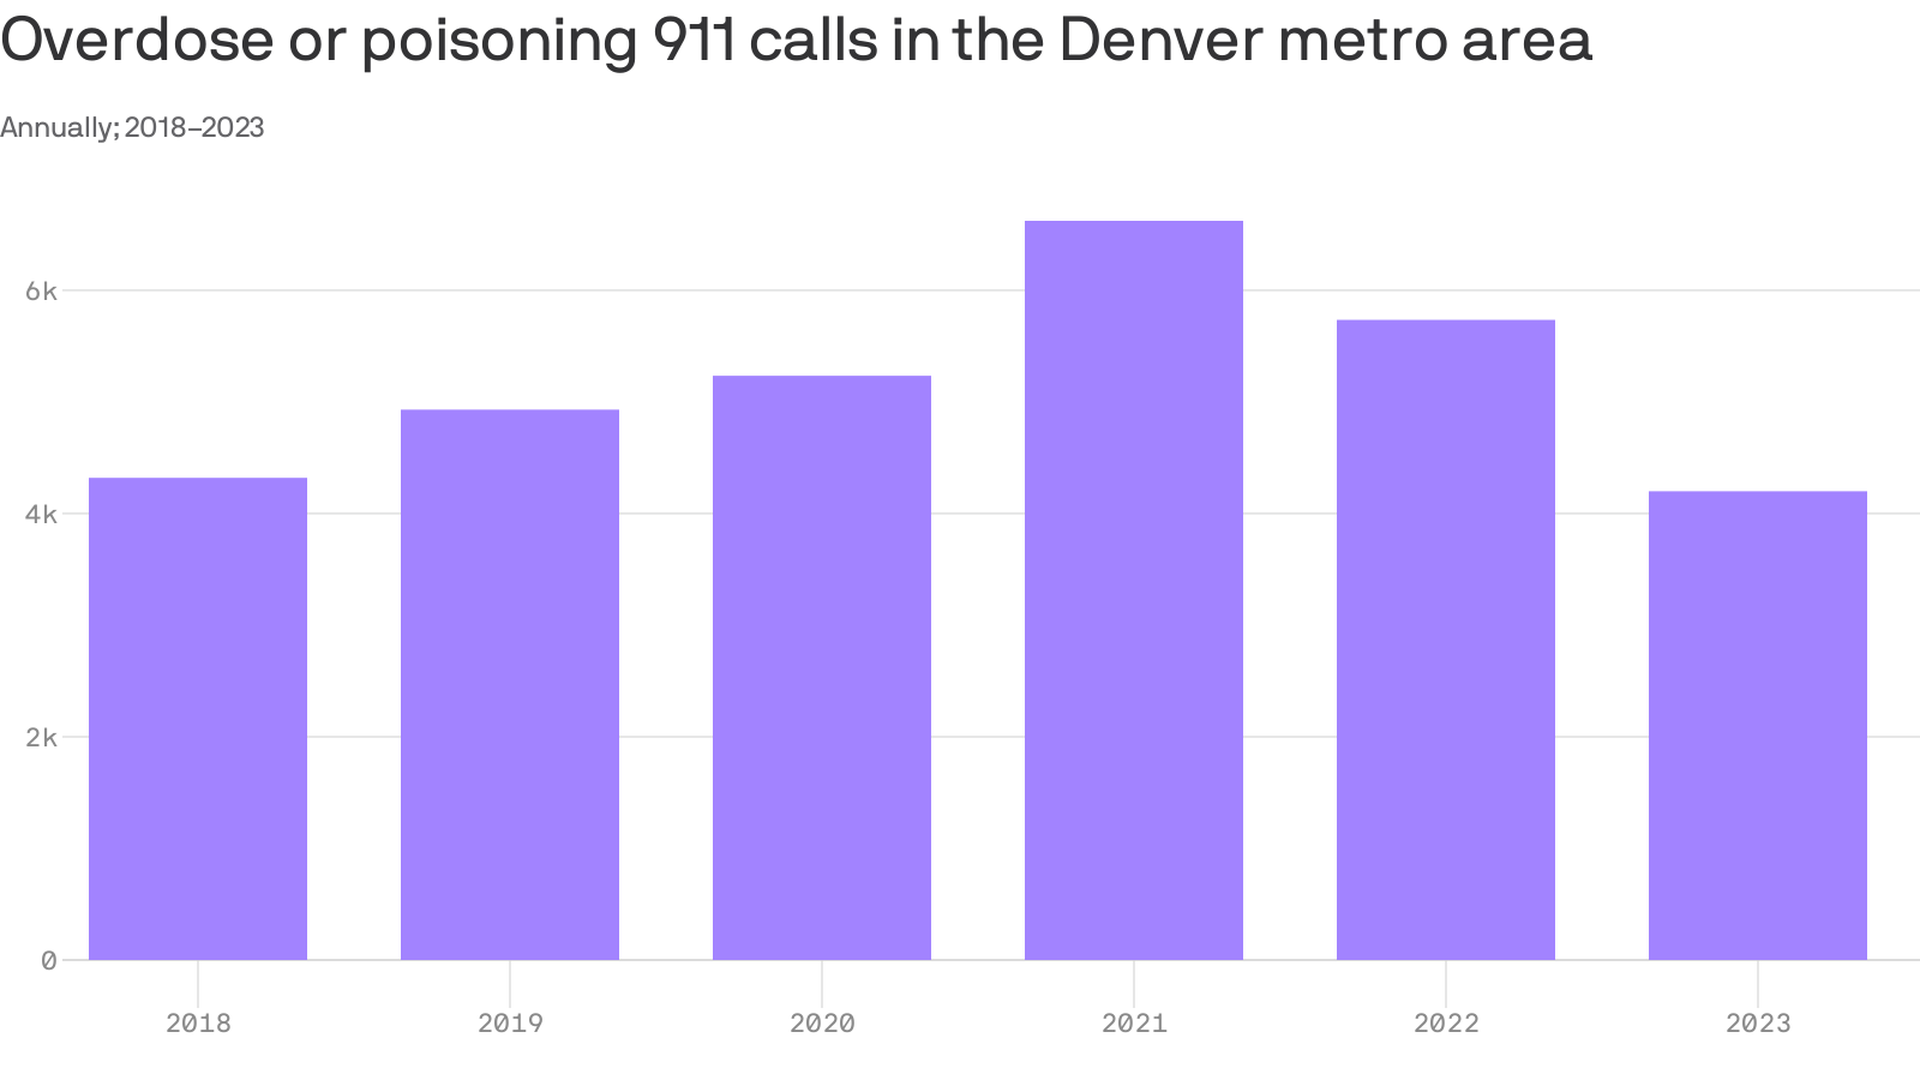 Annual number of overdose or poisoning 911 calls in the Denver metro area from 2018 to 2023, showing a peak in 2021 before declining in 2023.